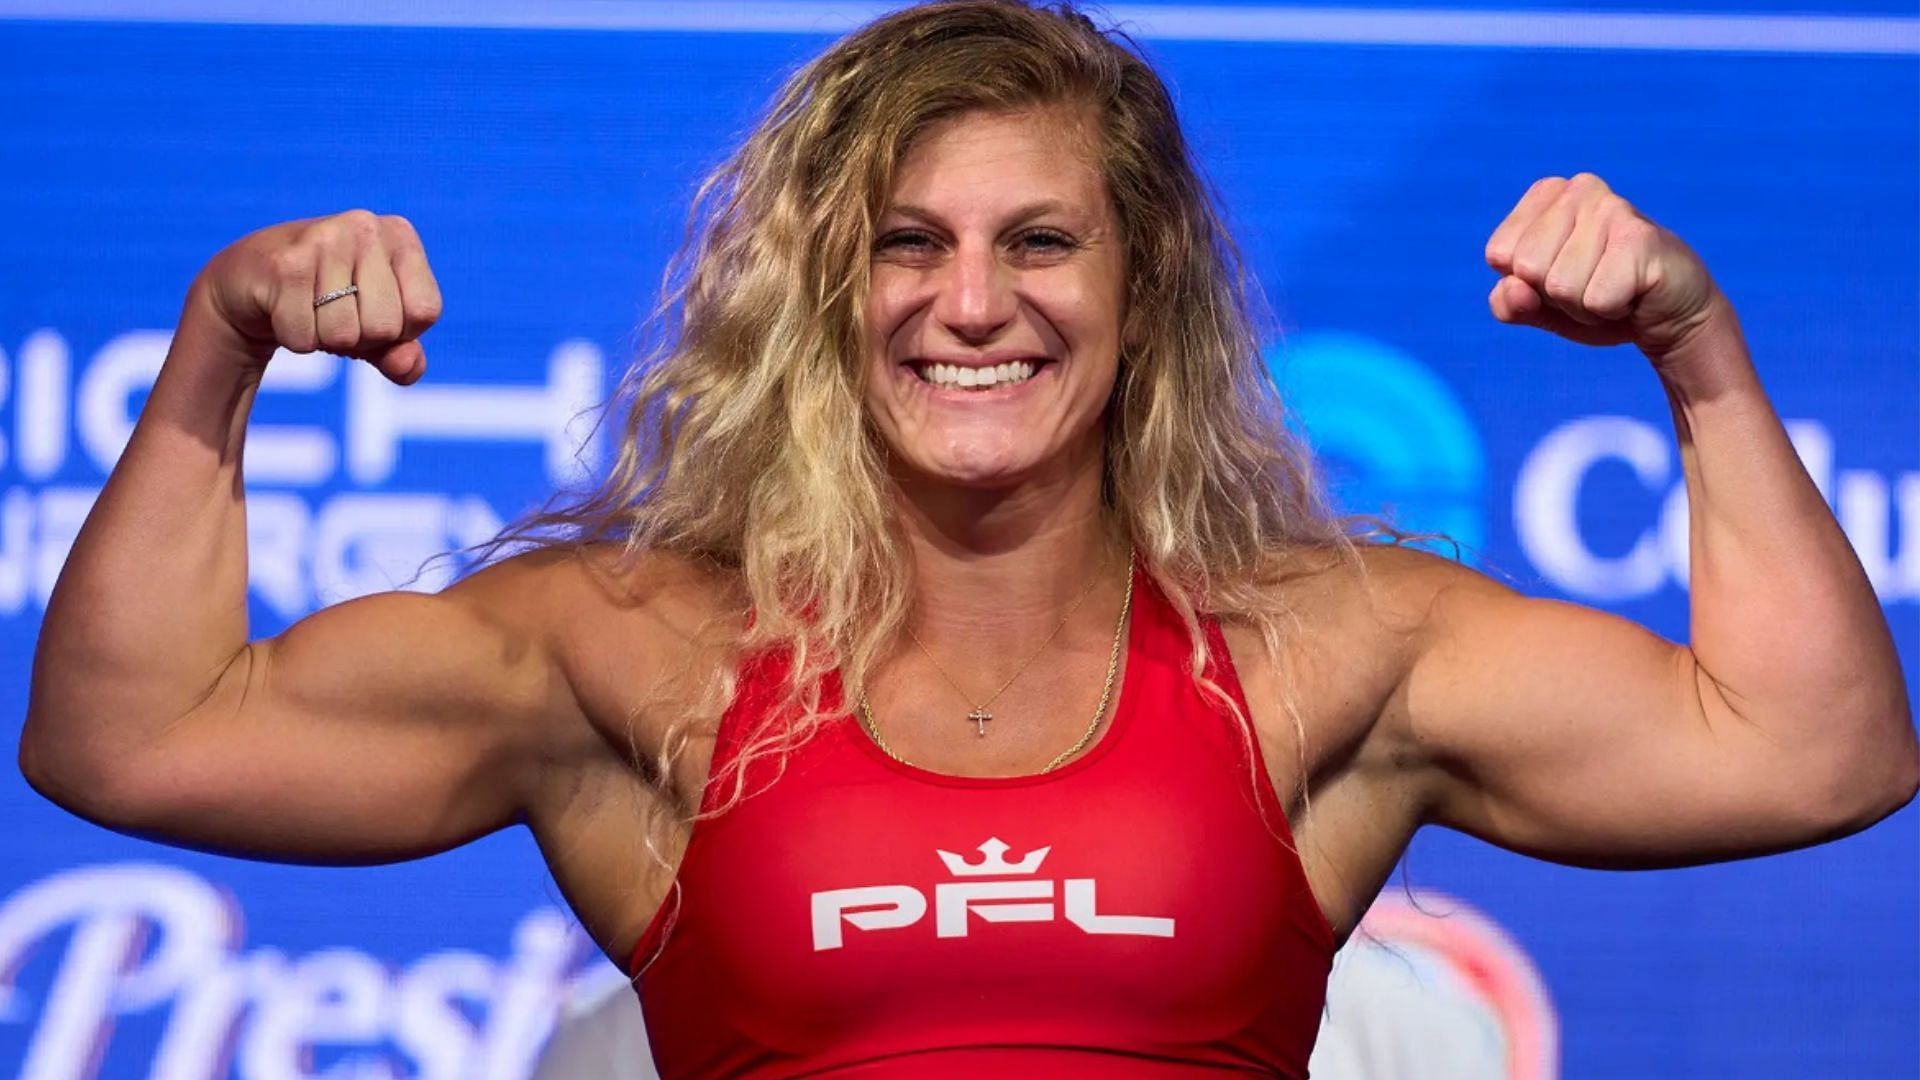 Could Kayla Harrison become a UFC champion? [Image courtesy of @kaylaharrisonofficial on Instagram]